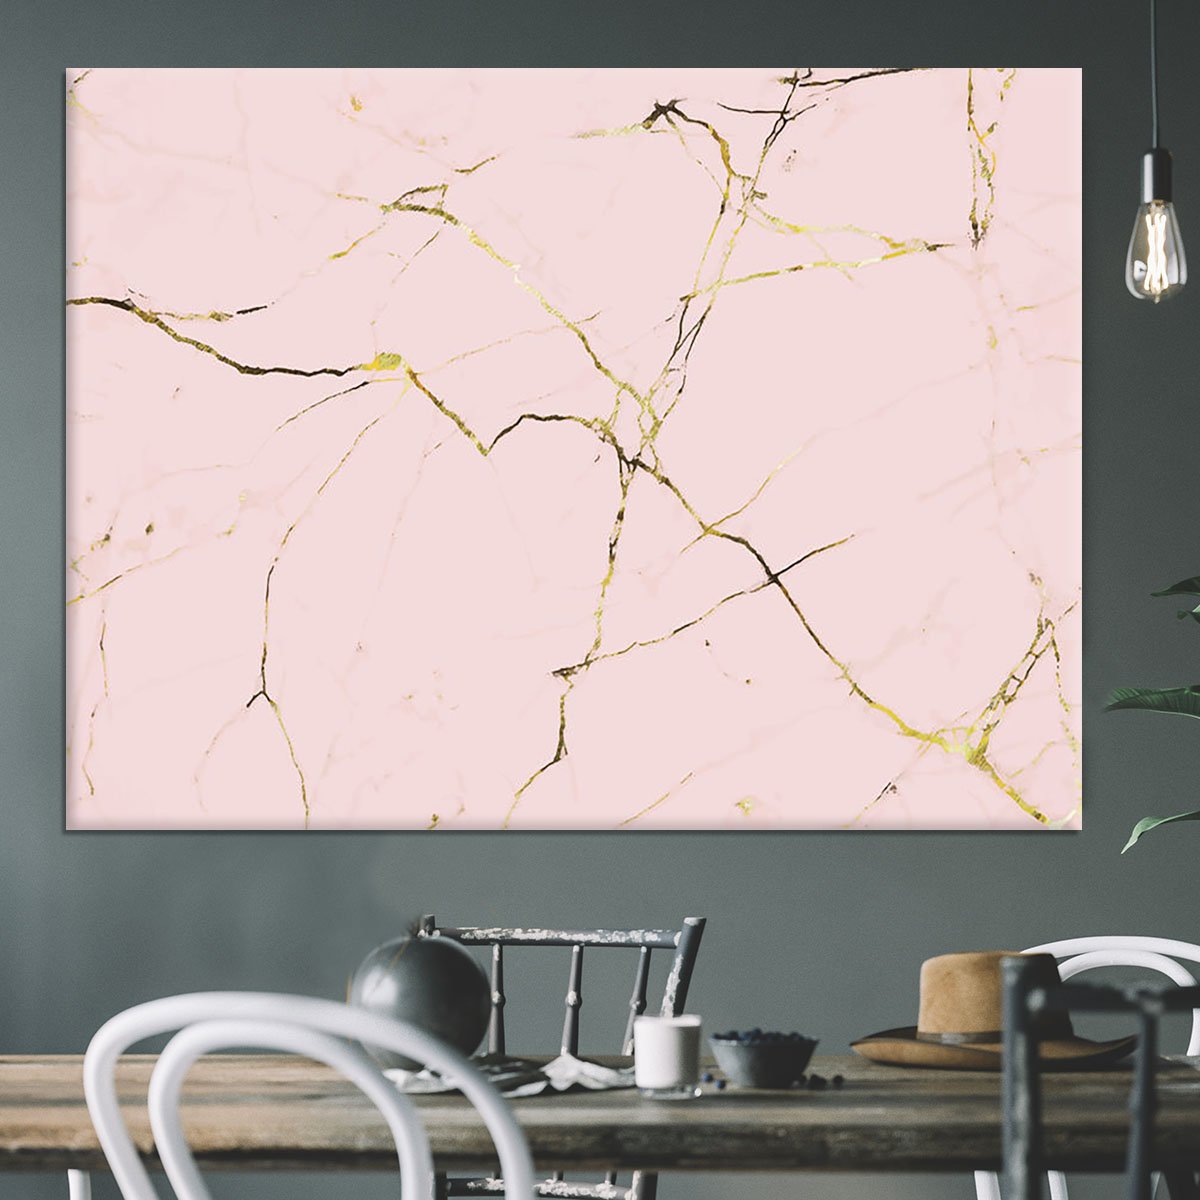 Baby Pink and Gold Marble Canvas Print or Poster